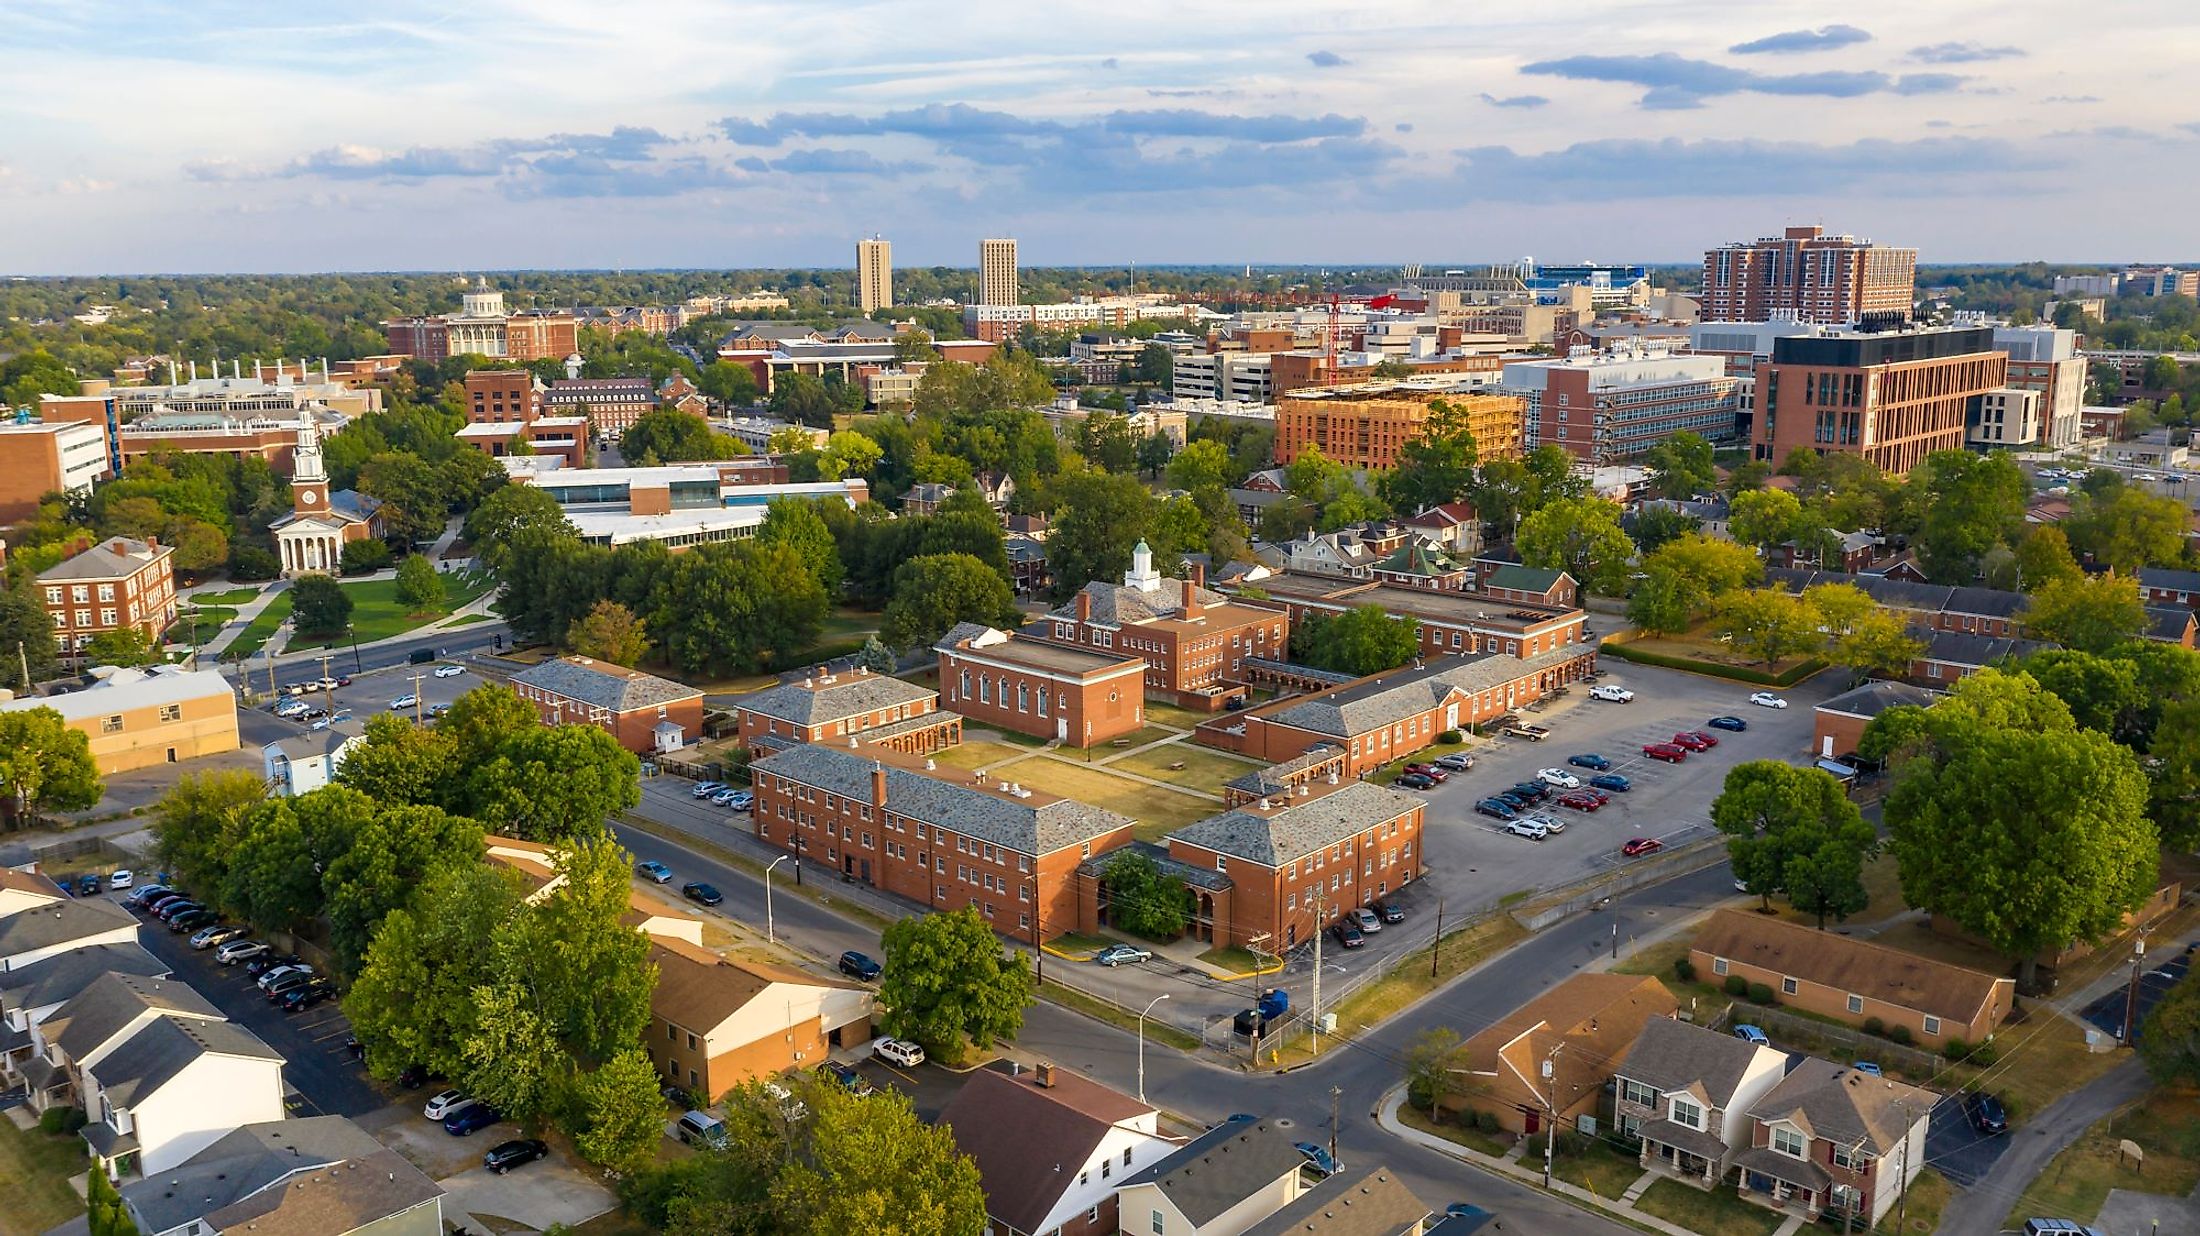 Aerial view of an university campus area looking into the city suburbs in Lexington, Kentucky. 